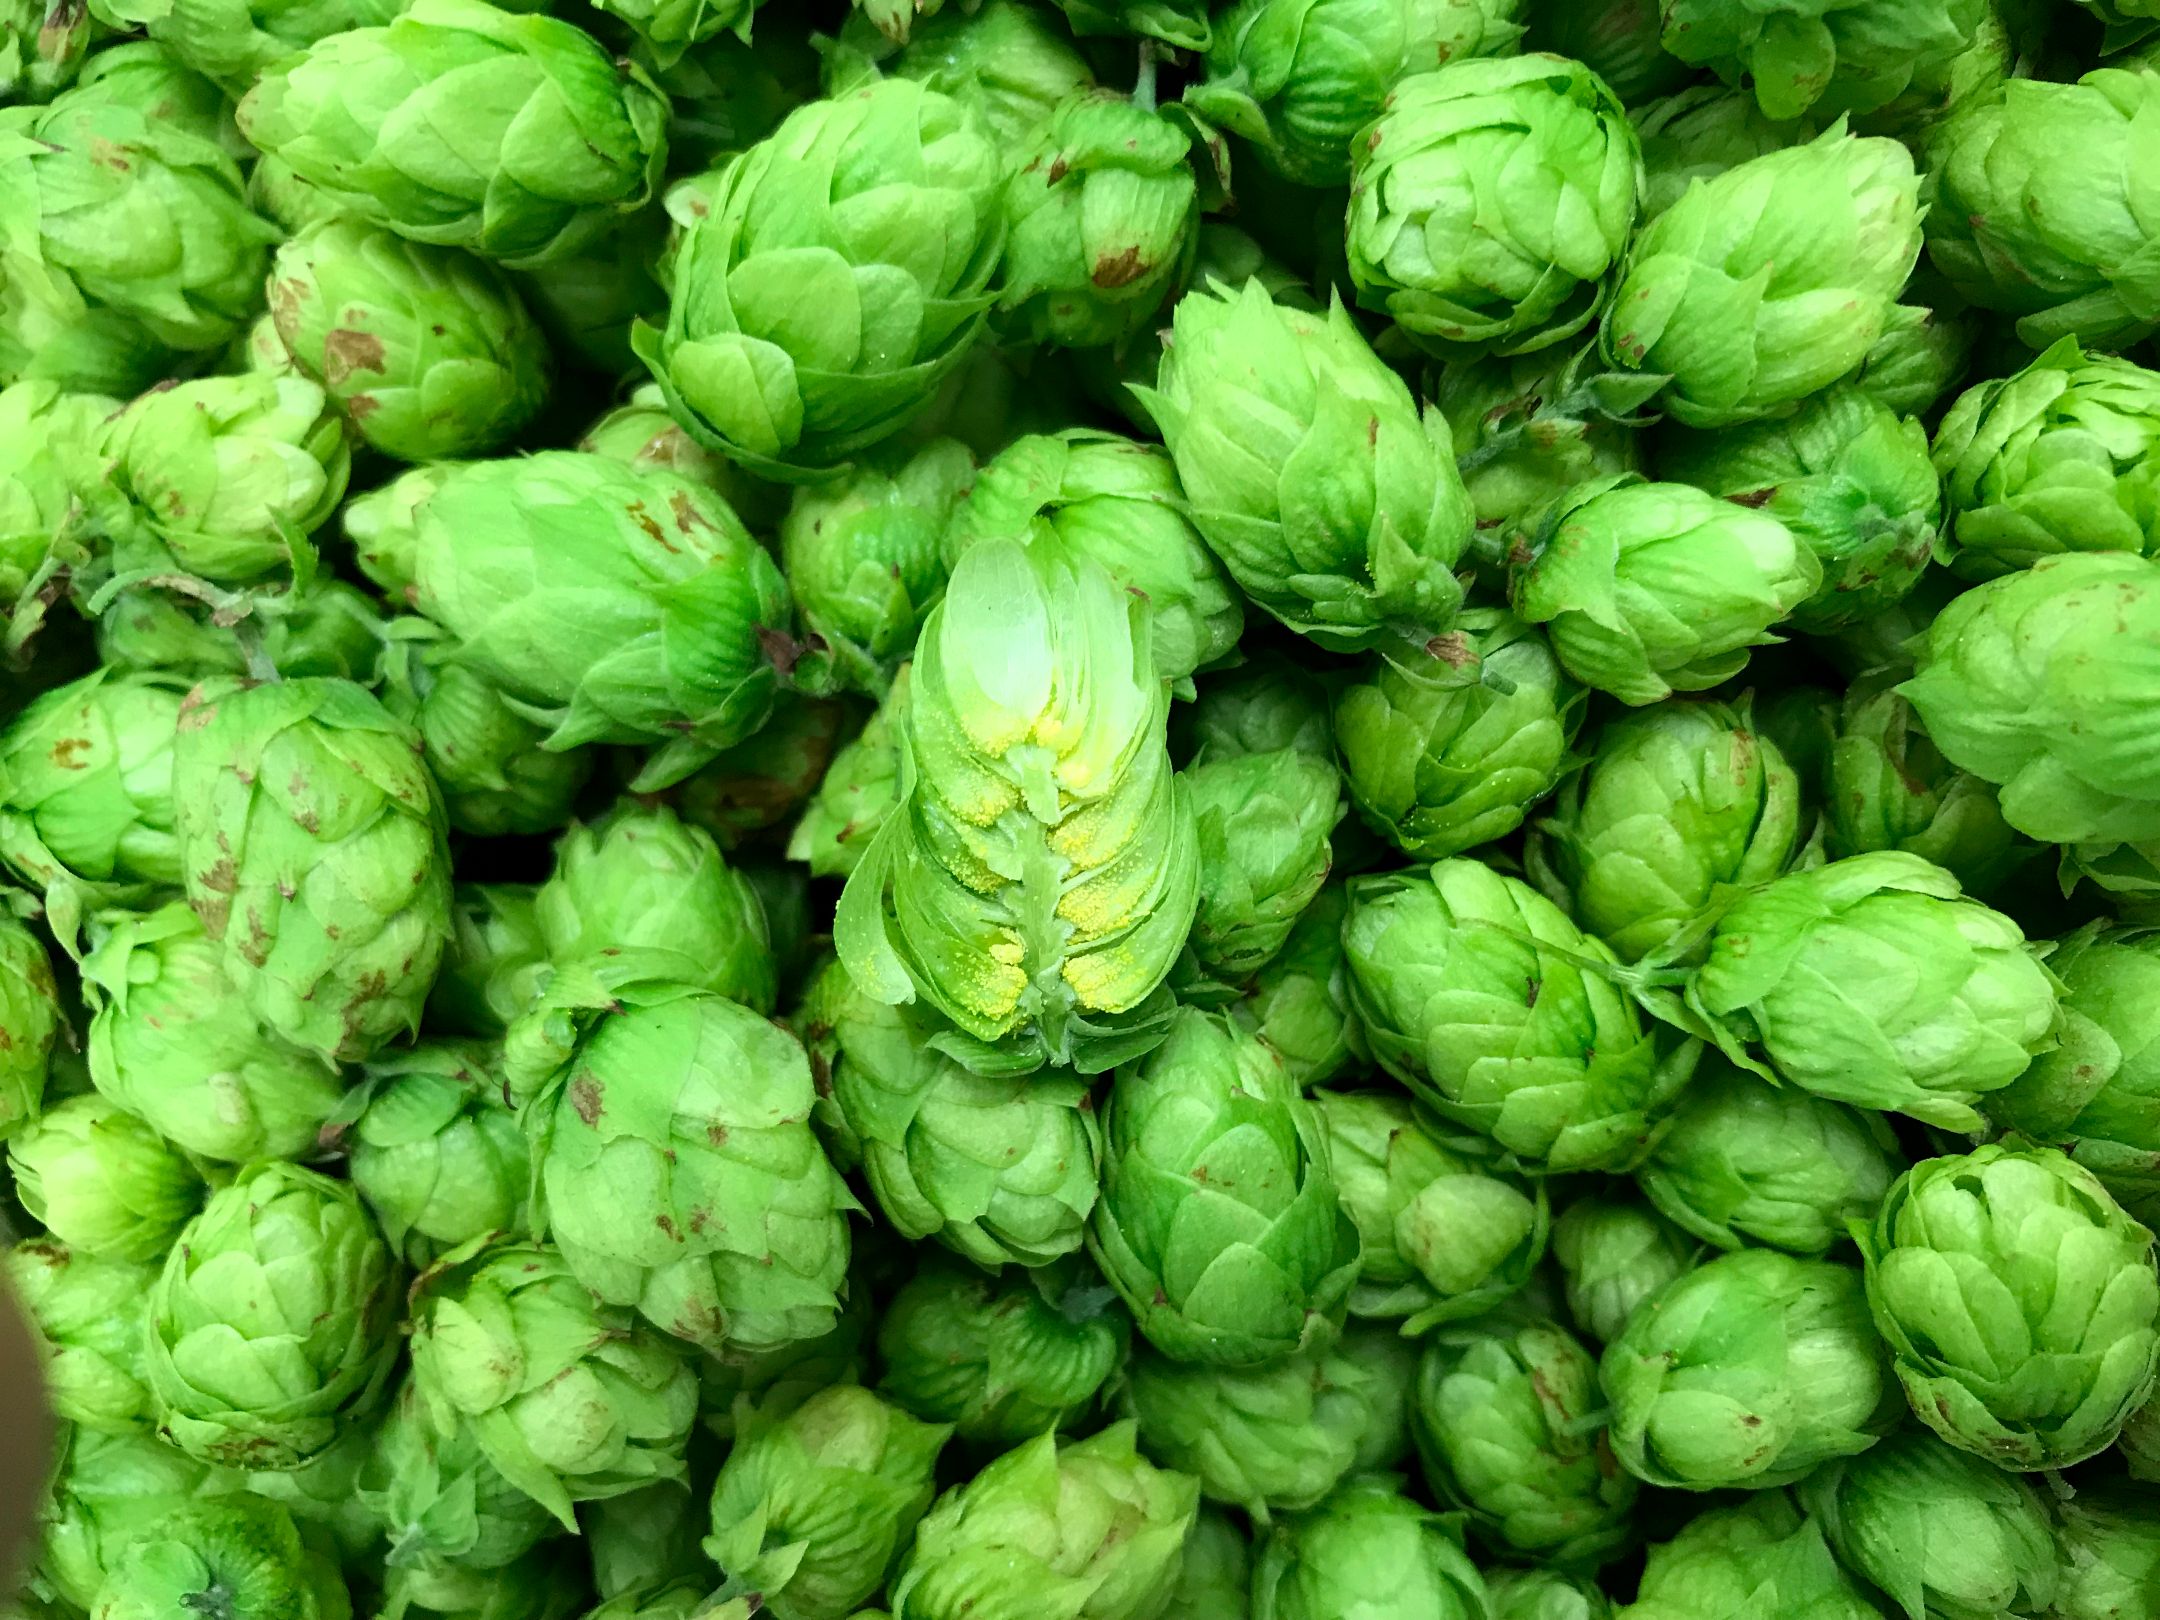 Ripe hop cones. Hop cones produce small yellow substances called lupulin glands at the base of bracts. 